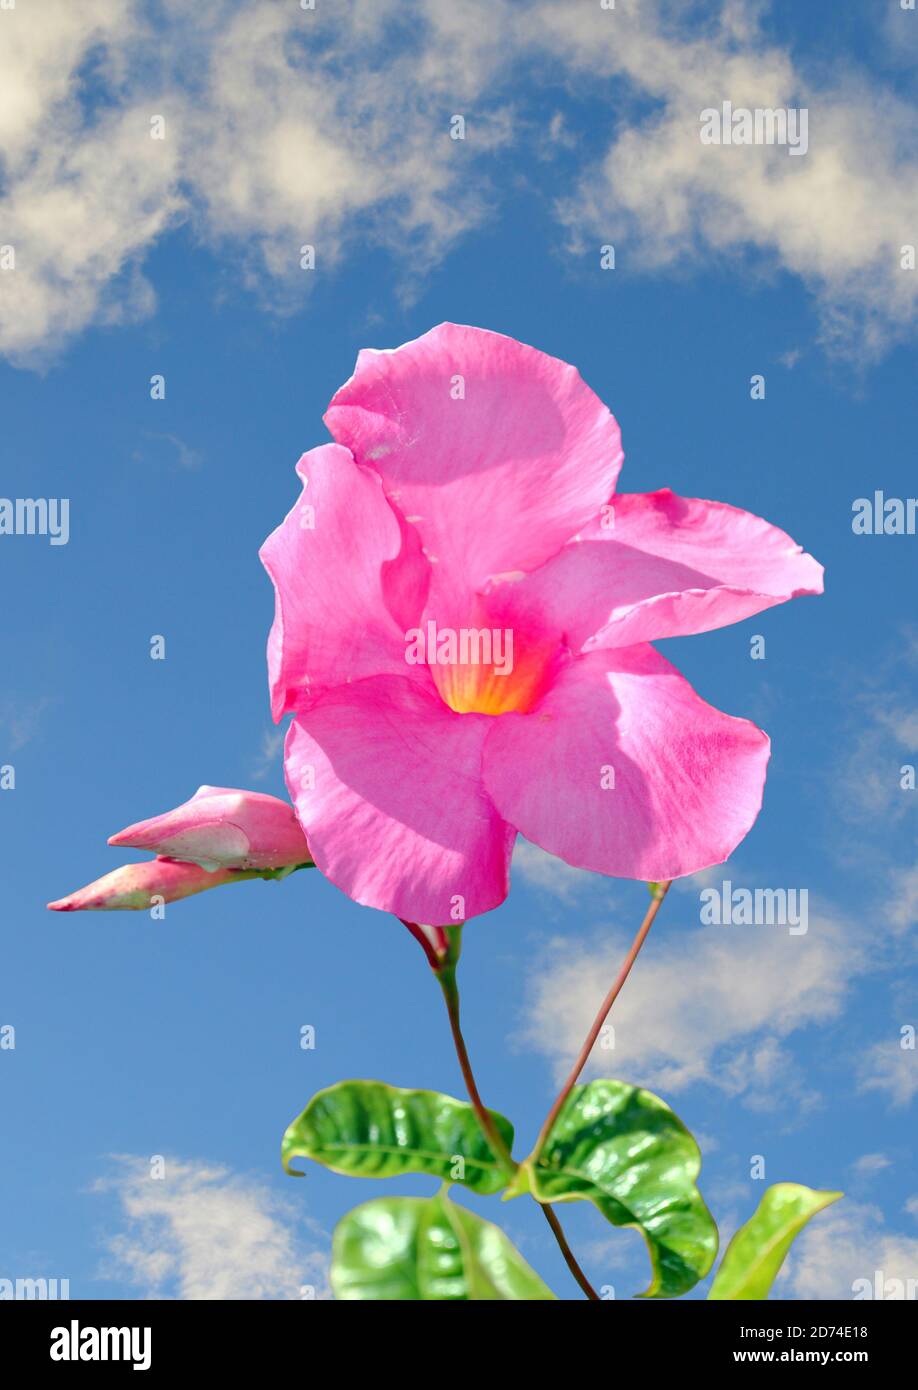 Mandevilla boliviensis flower with a blue sky background Stock Photo